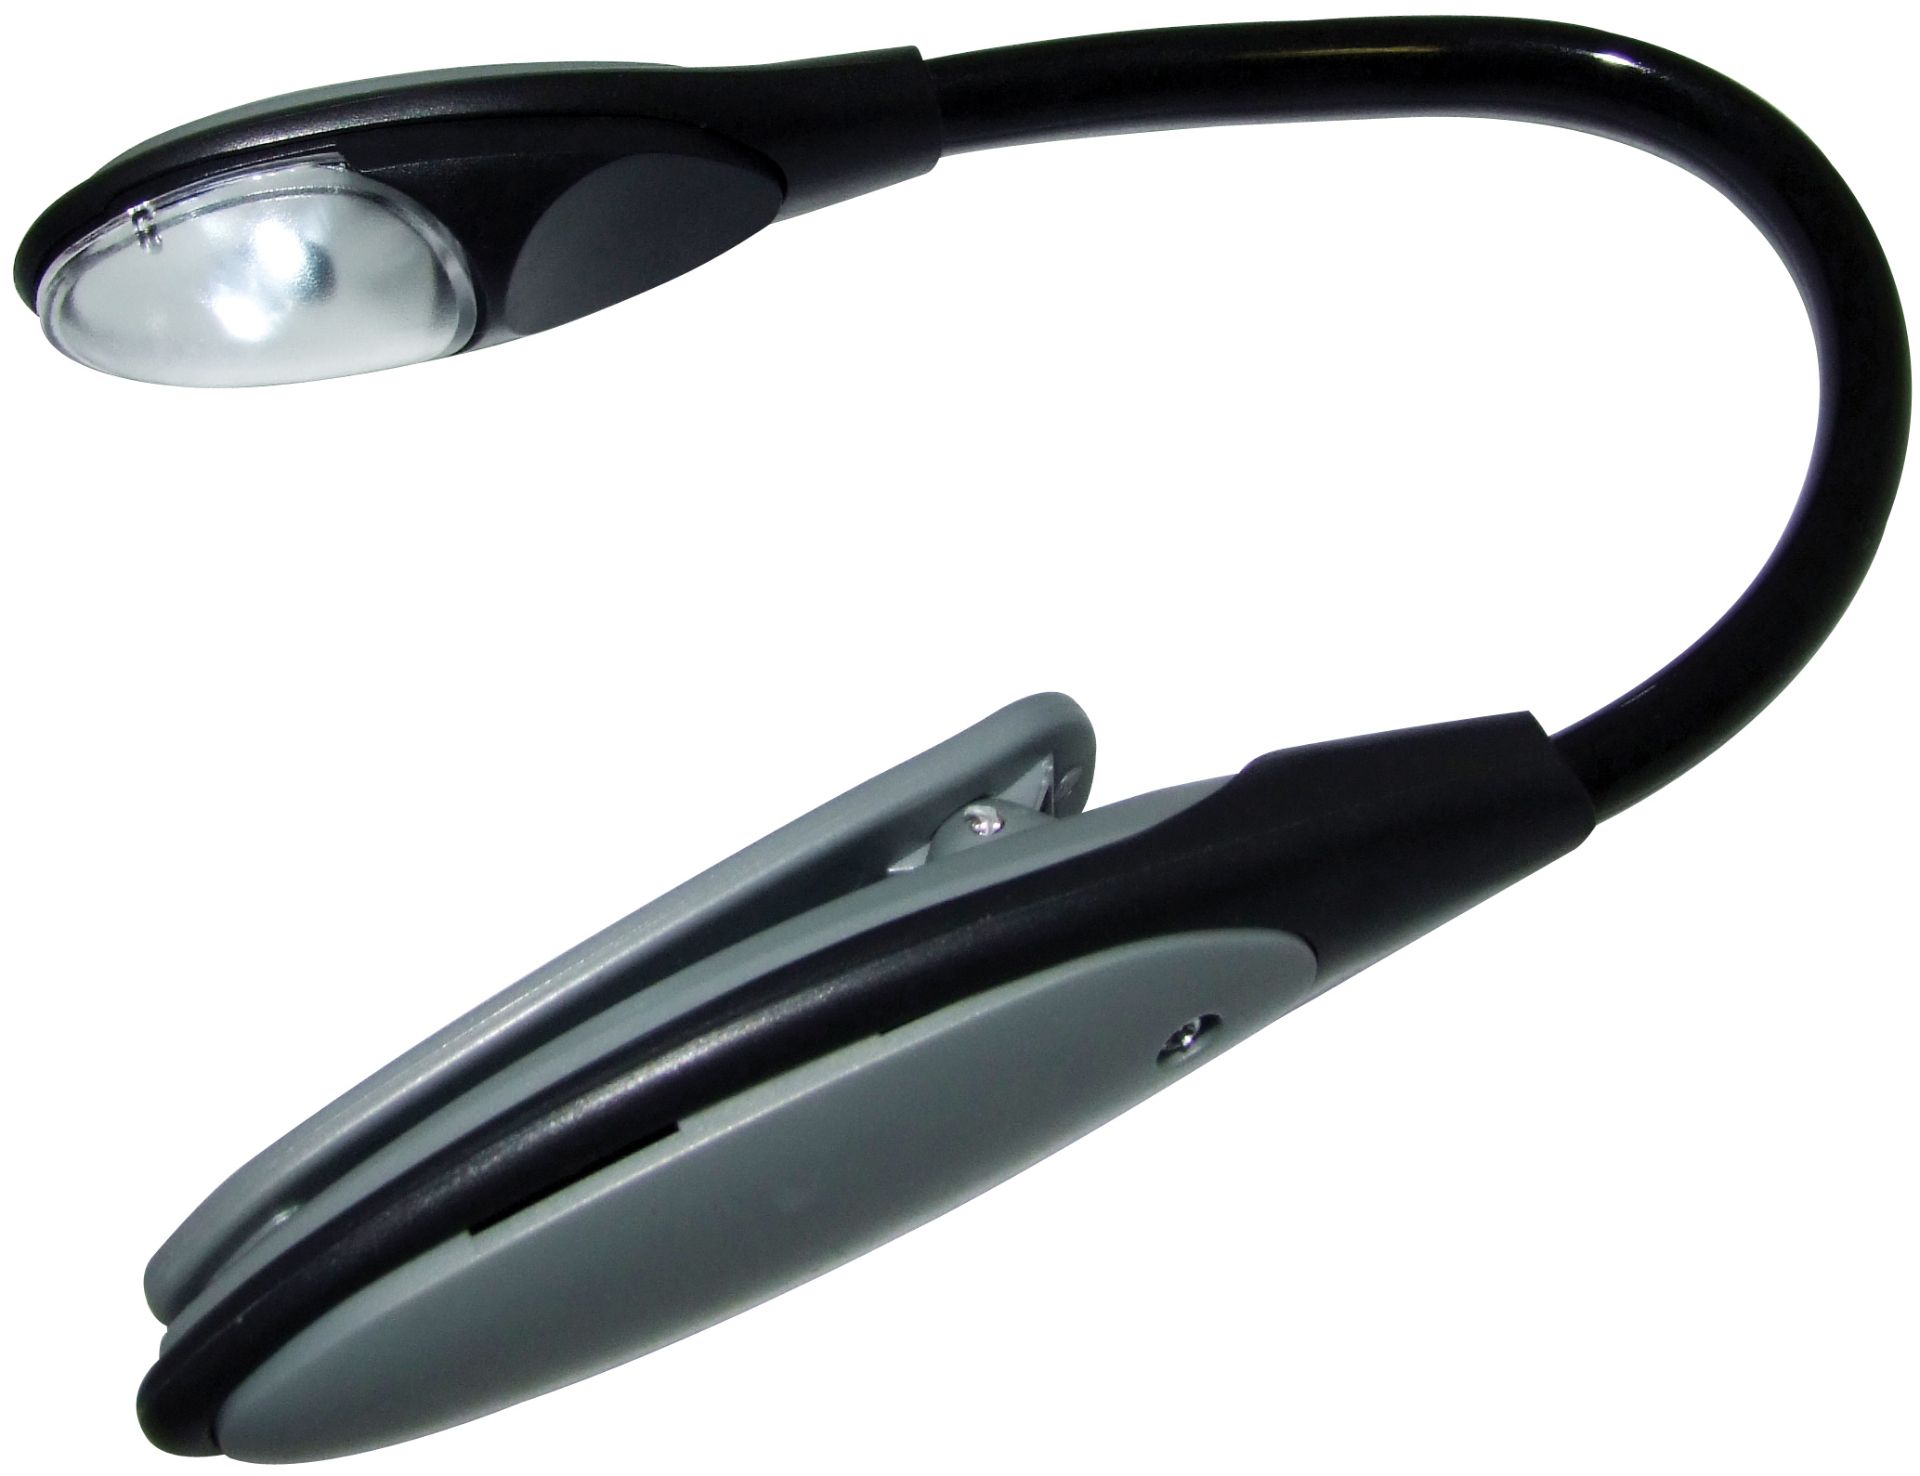 V *TRADE QTY* Brand New Flexible LED Clip Light X 4 YOUR BID PRICE TO BE MULTIPLIED BY FOUR